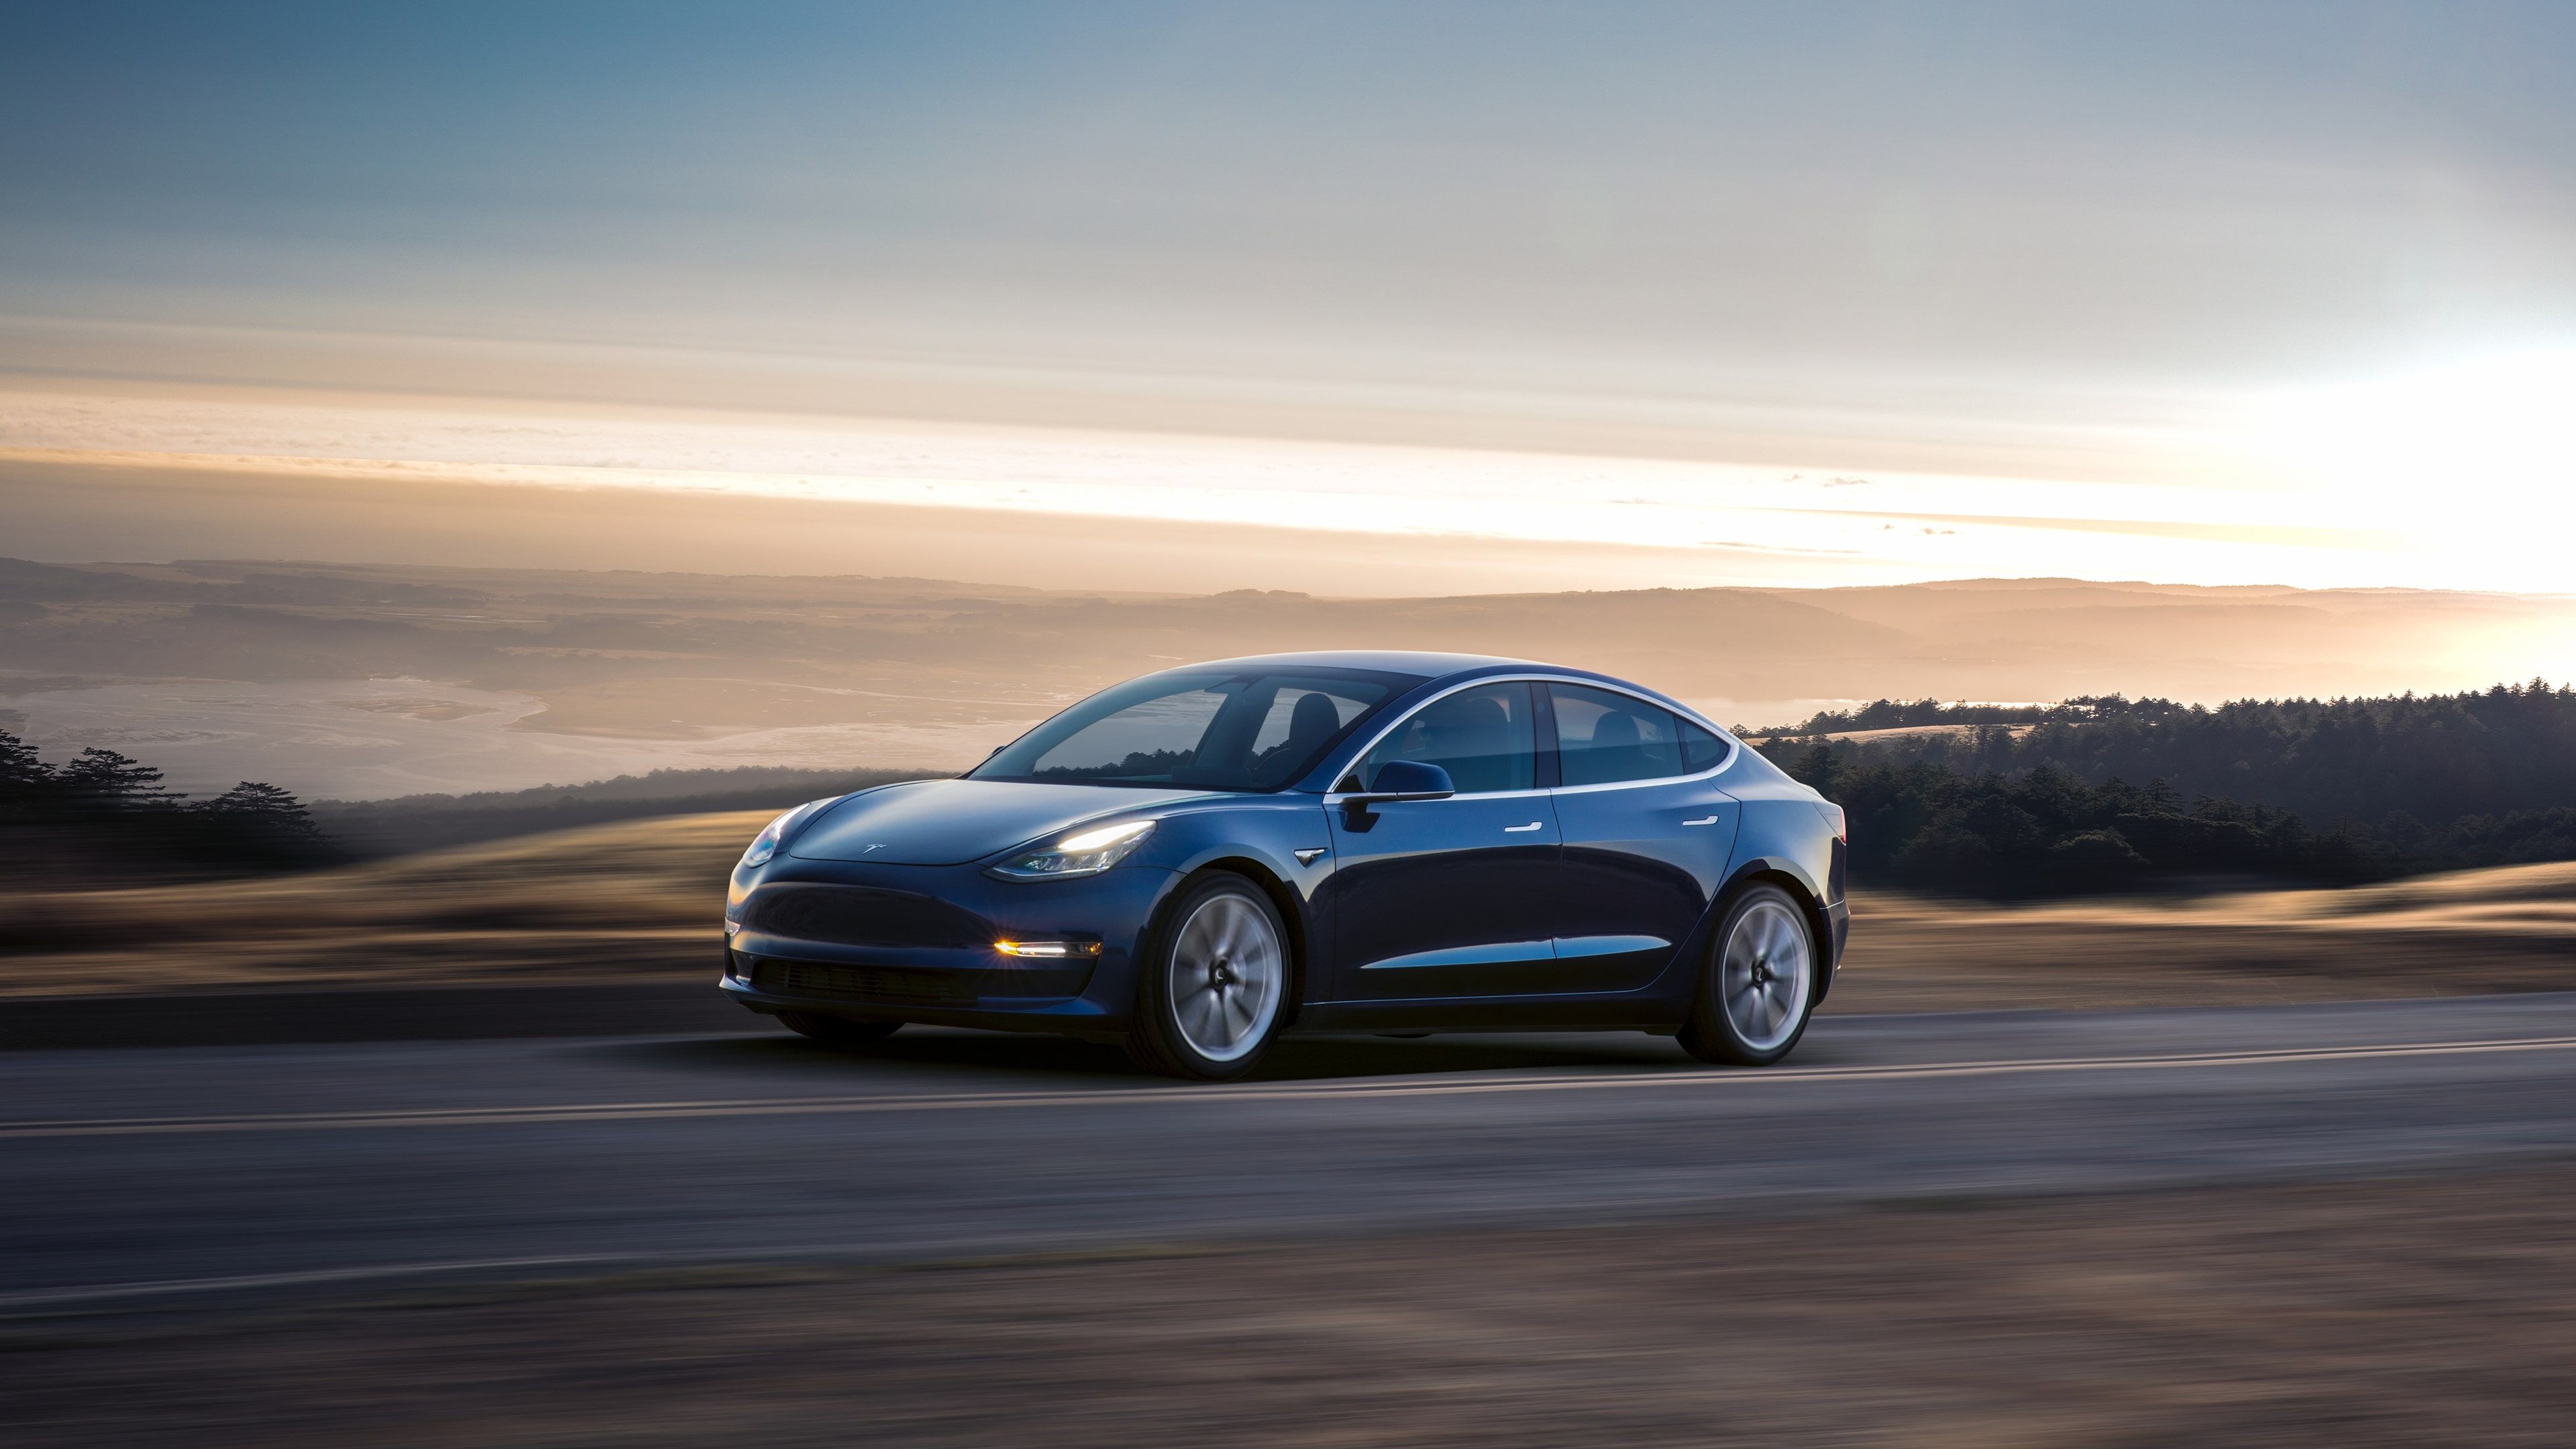 2021 Tesla Autopilot Will Recognize And Respond To Traffic Signals And Stop Signs